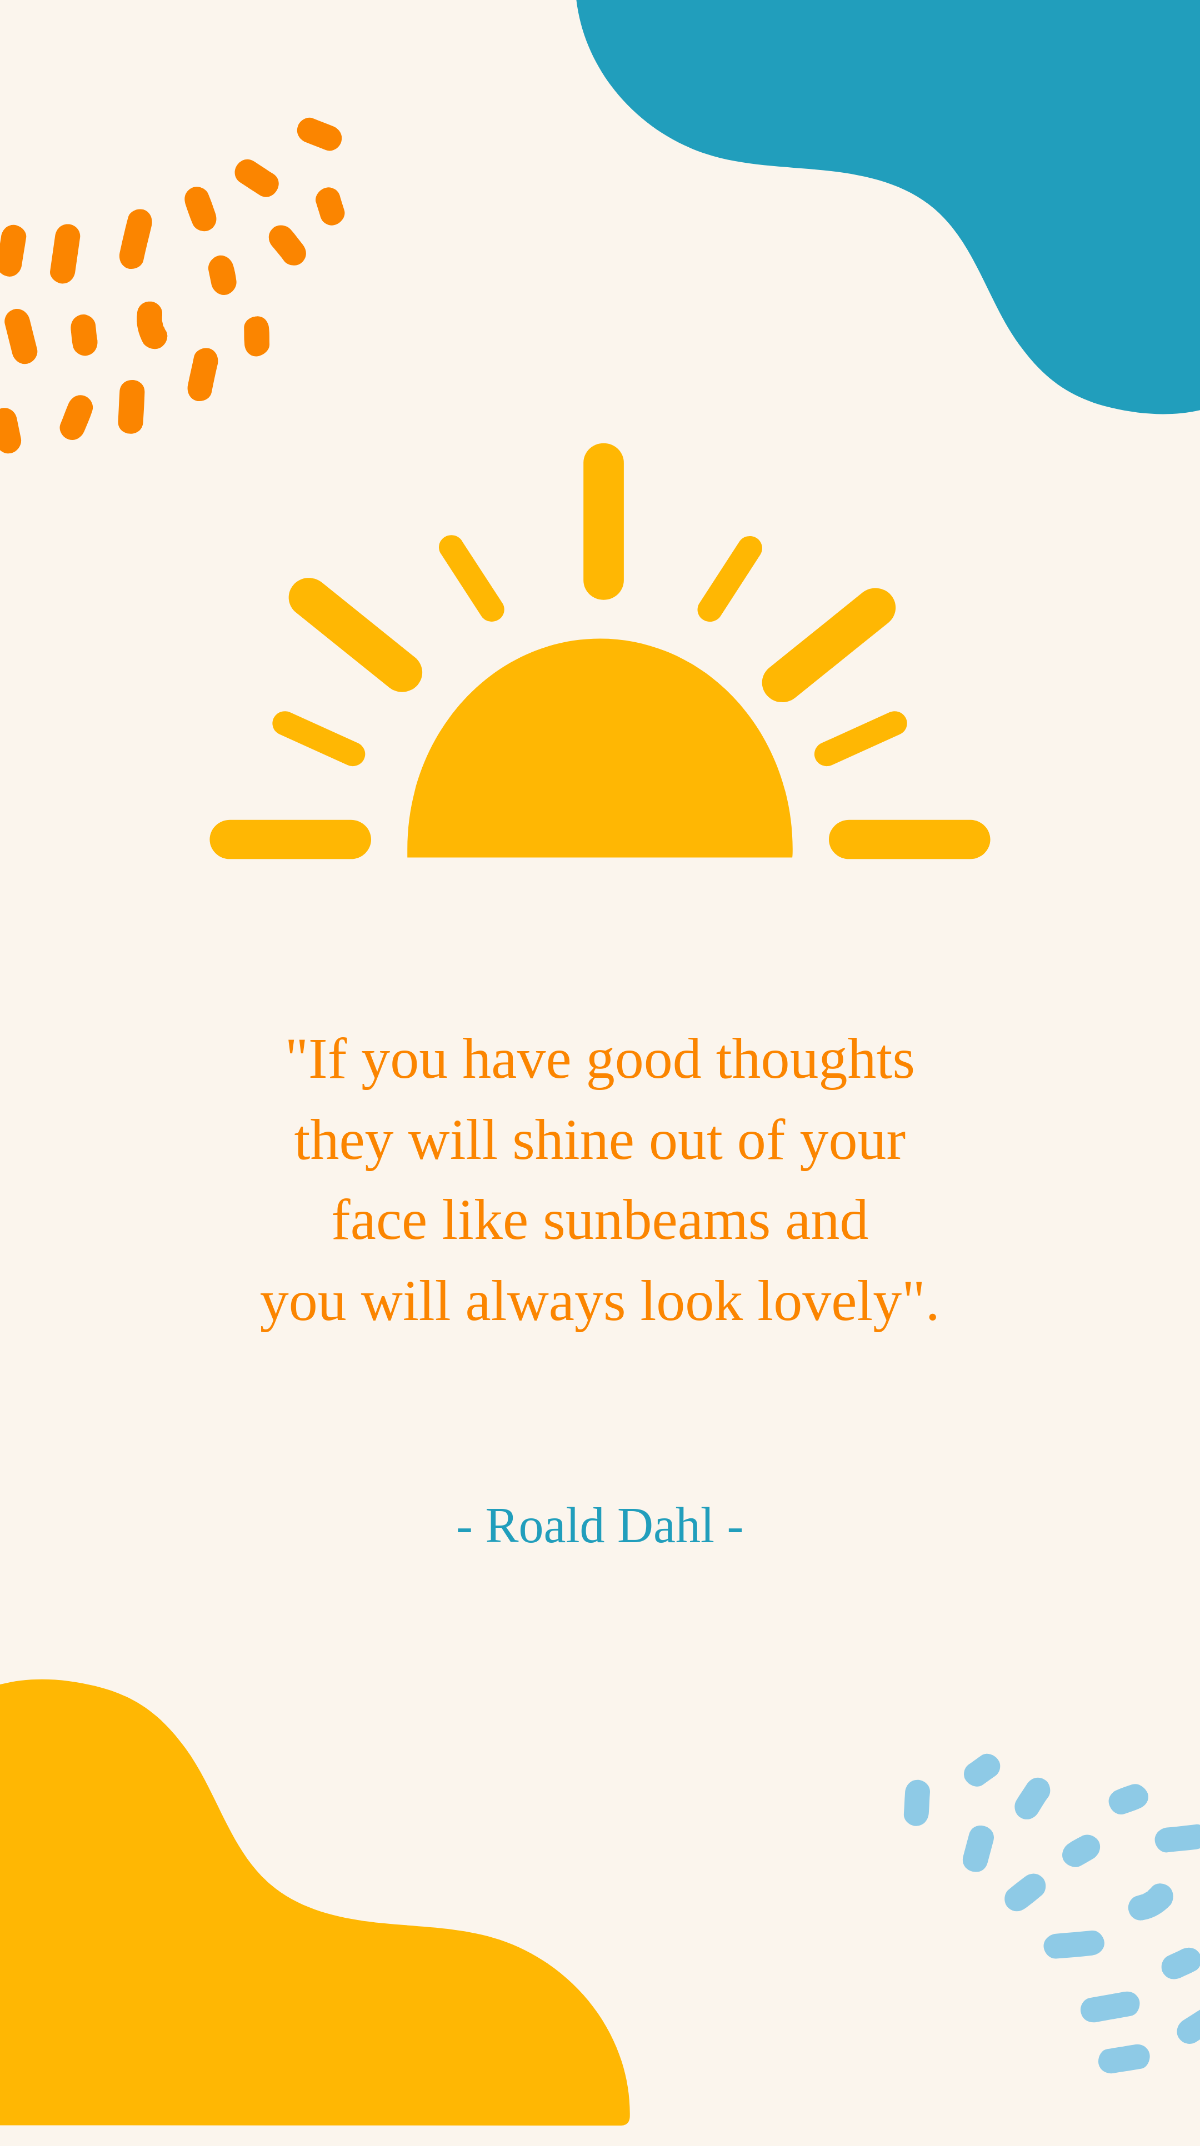 Roald Dahl - “If you have good thoughts they will shine out of your face like sunbeams and you will always look lovely.”